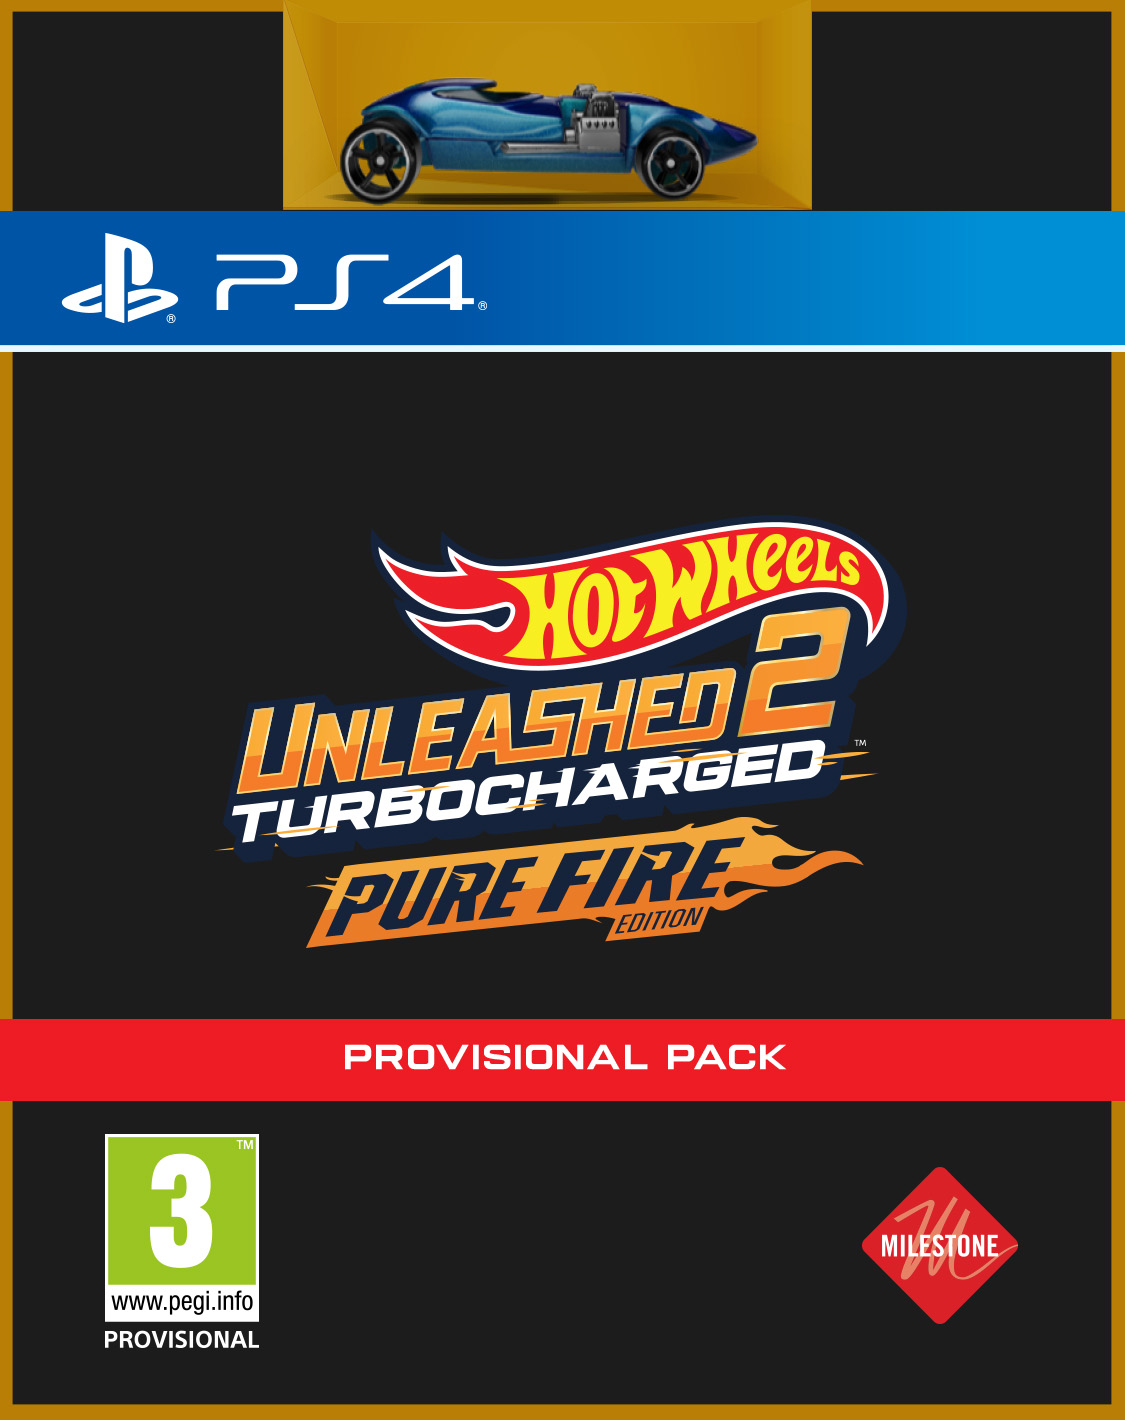 Wheels Unleashed PS4 Fire Edition - Hot Pure Turbocharged 2: